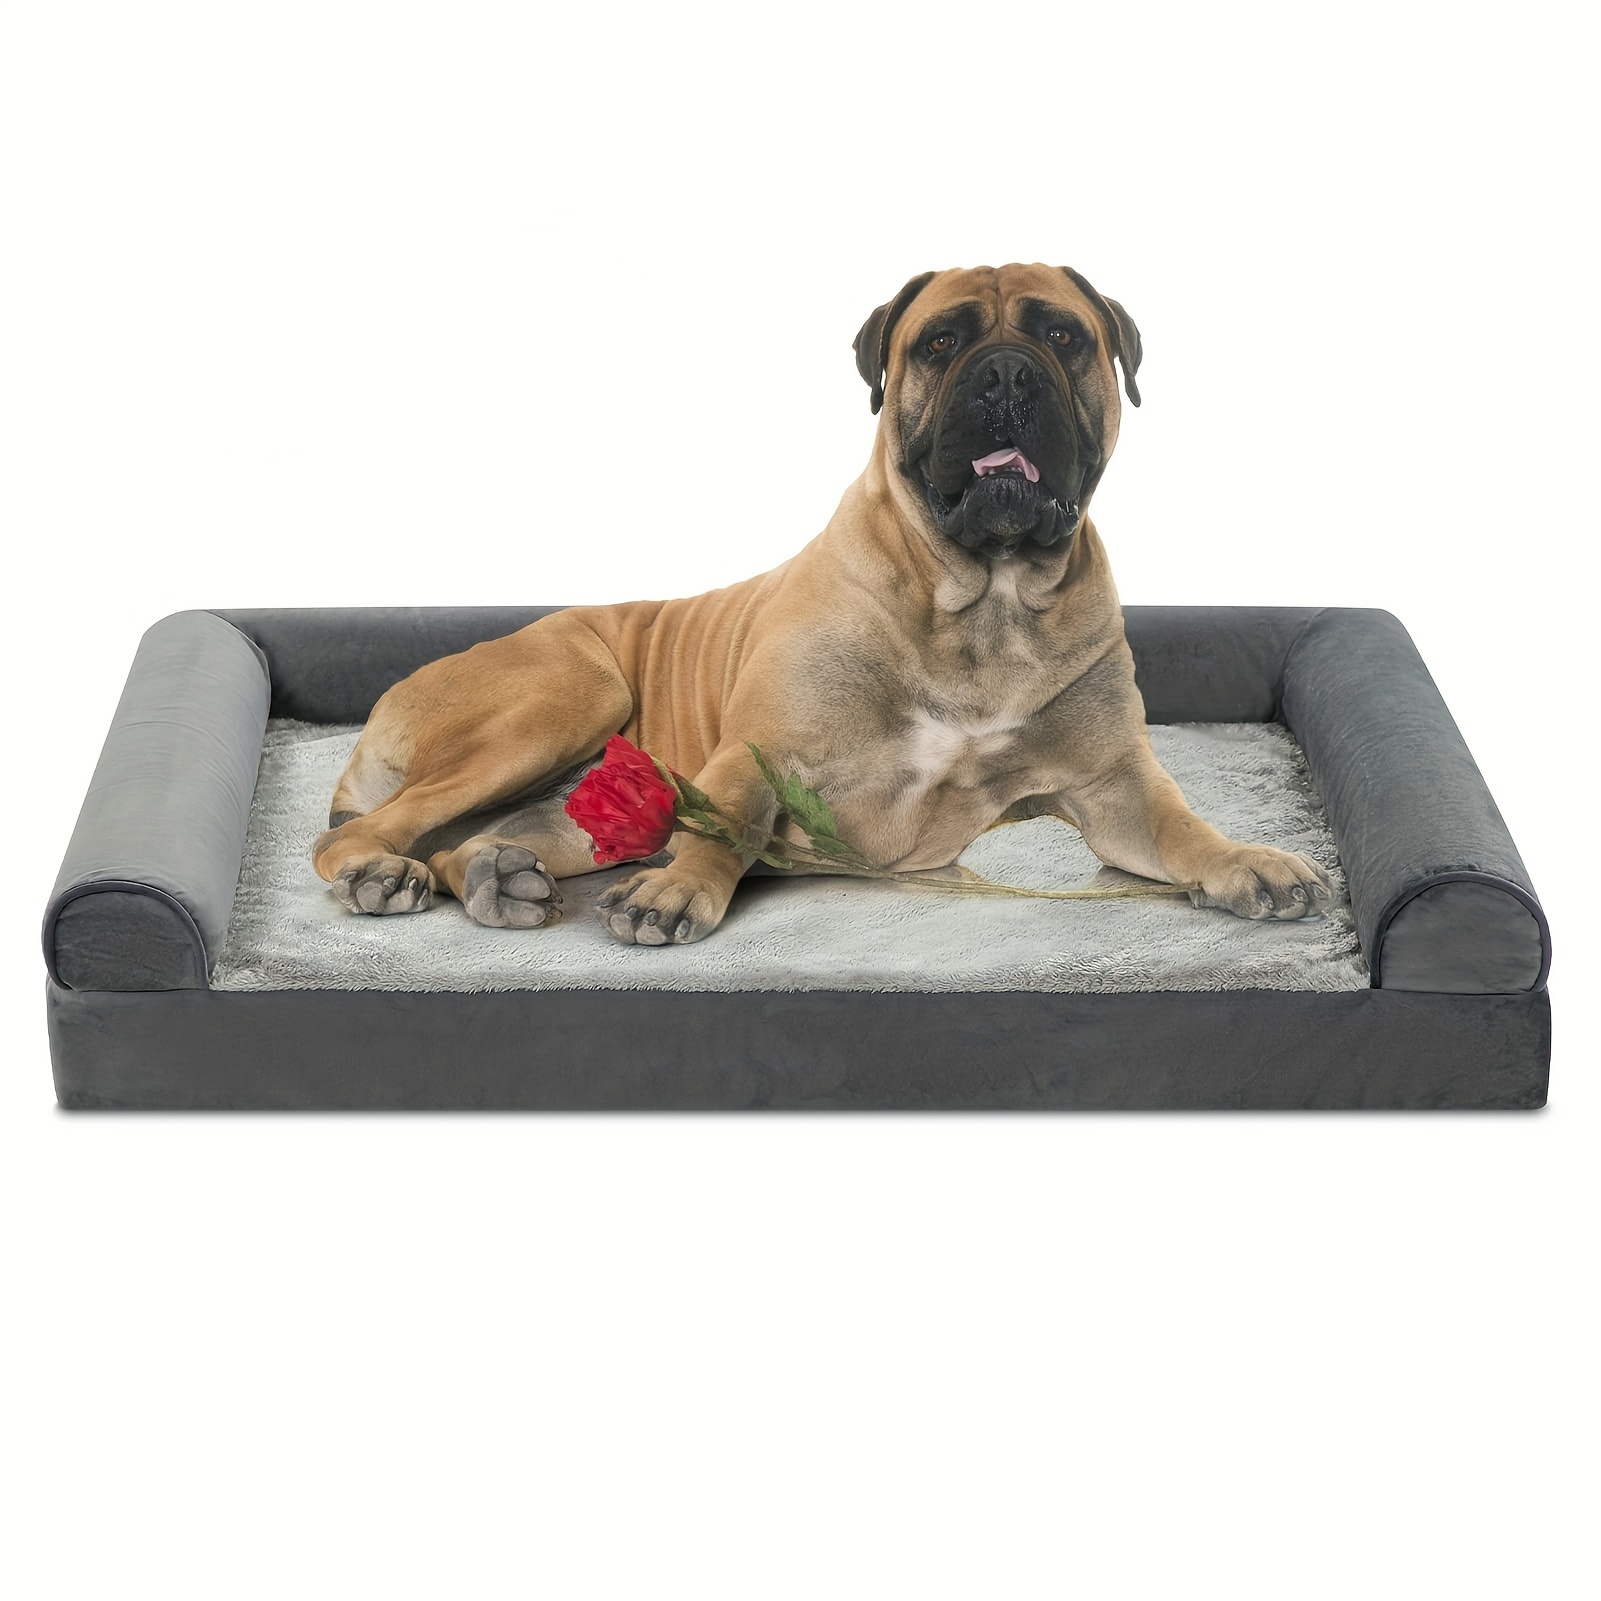 

Extra Large Memory Foam Dog Bed With Non-slip Bottom - Orthopedic Couch For Medium To Large Breeds, Washable Cover Included